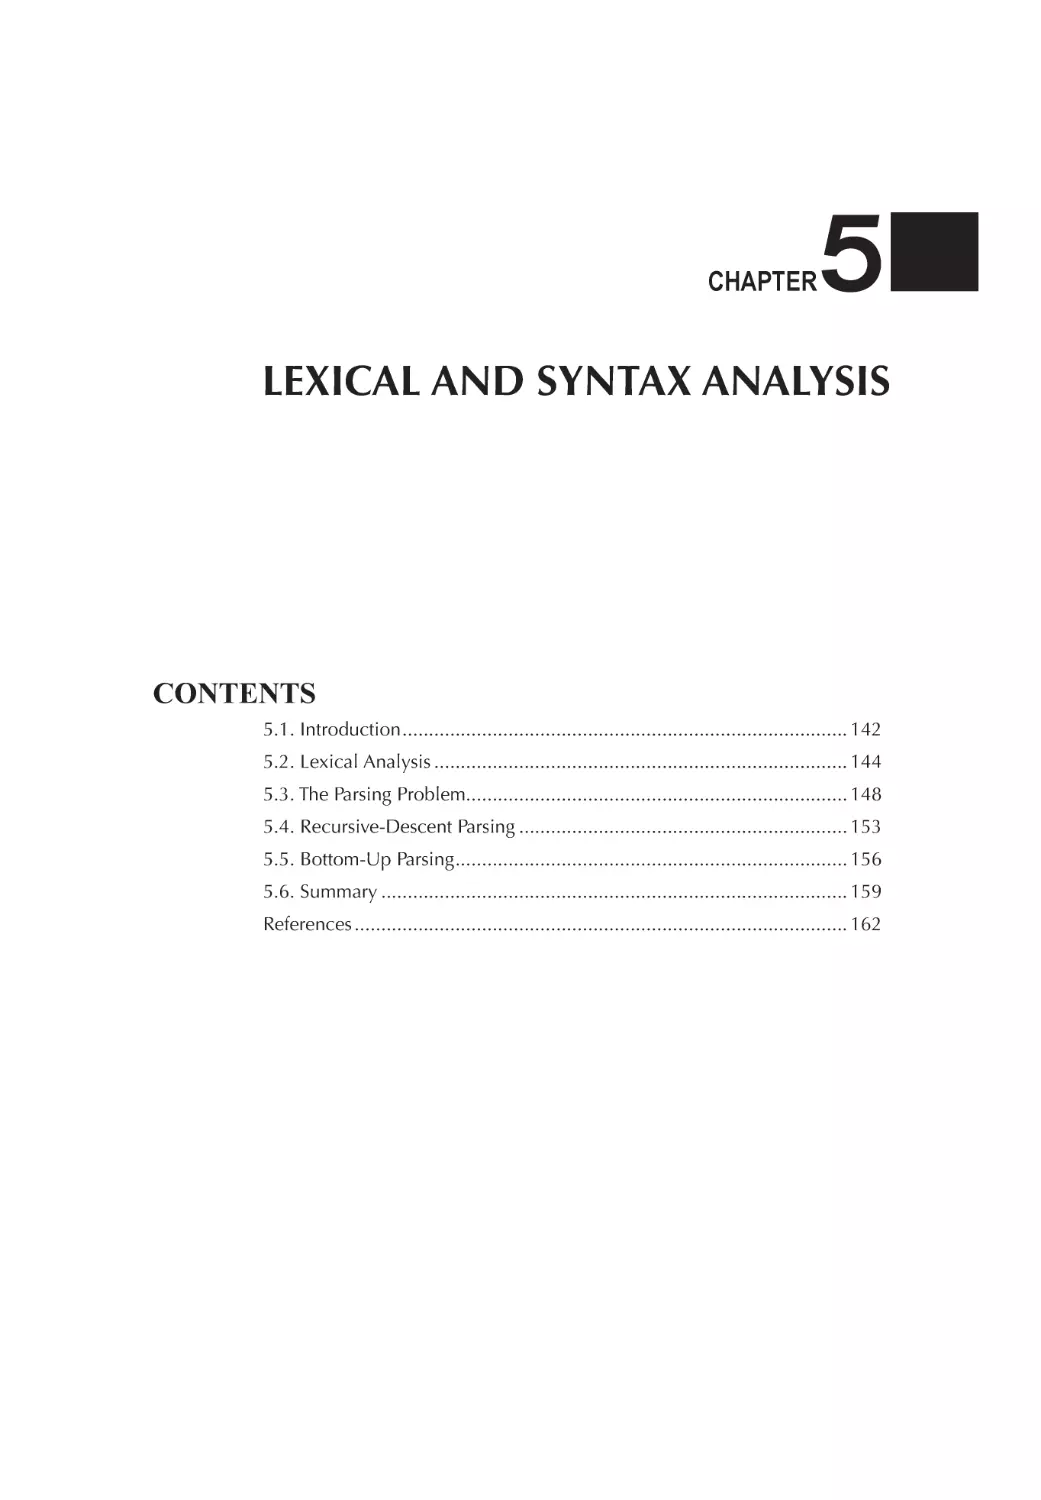 Chapter 5 Lexical and Syntax Analysis